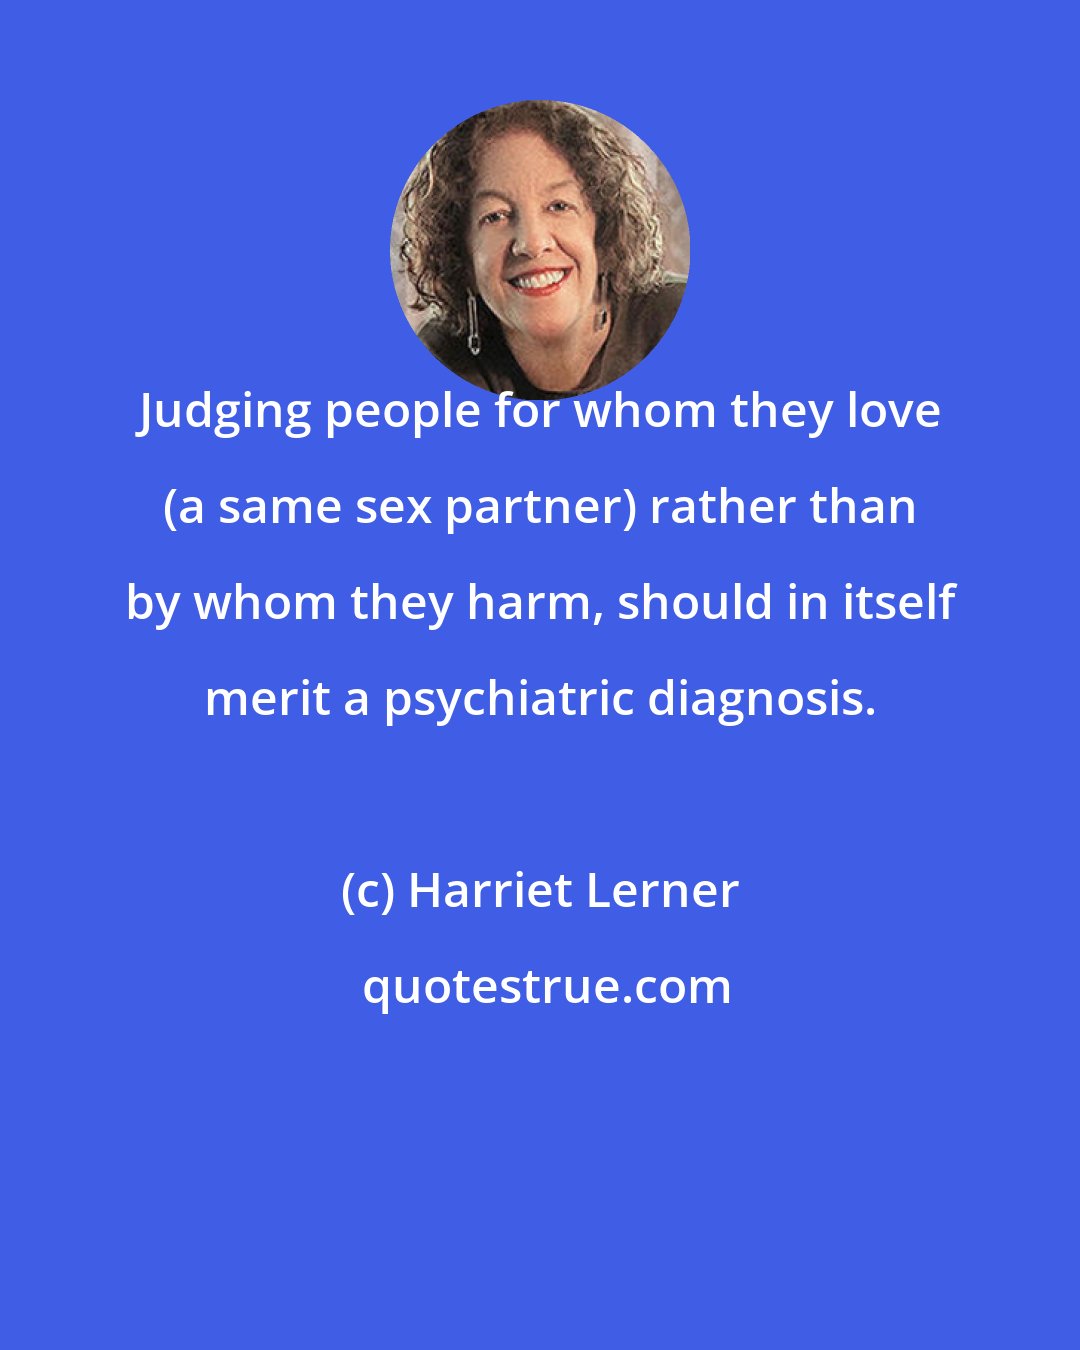 Harriet Lerner: Judging people for whom they love (a same sex partner) rather than by whom they harm, should in itself merit a psychiatric diagnosis.